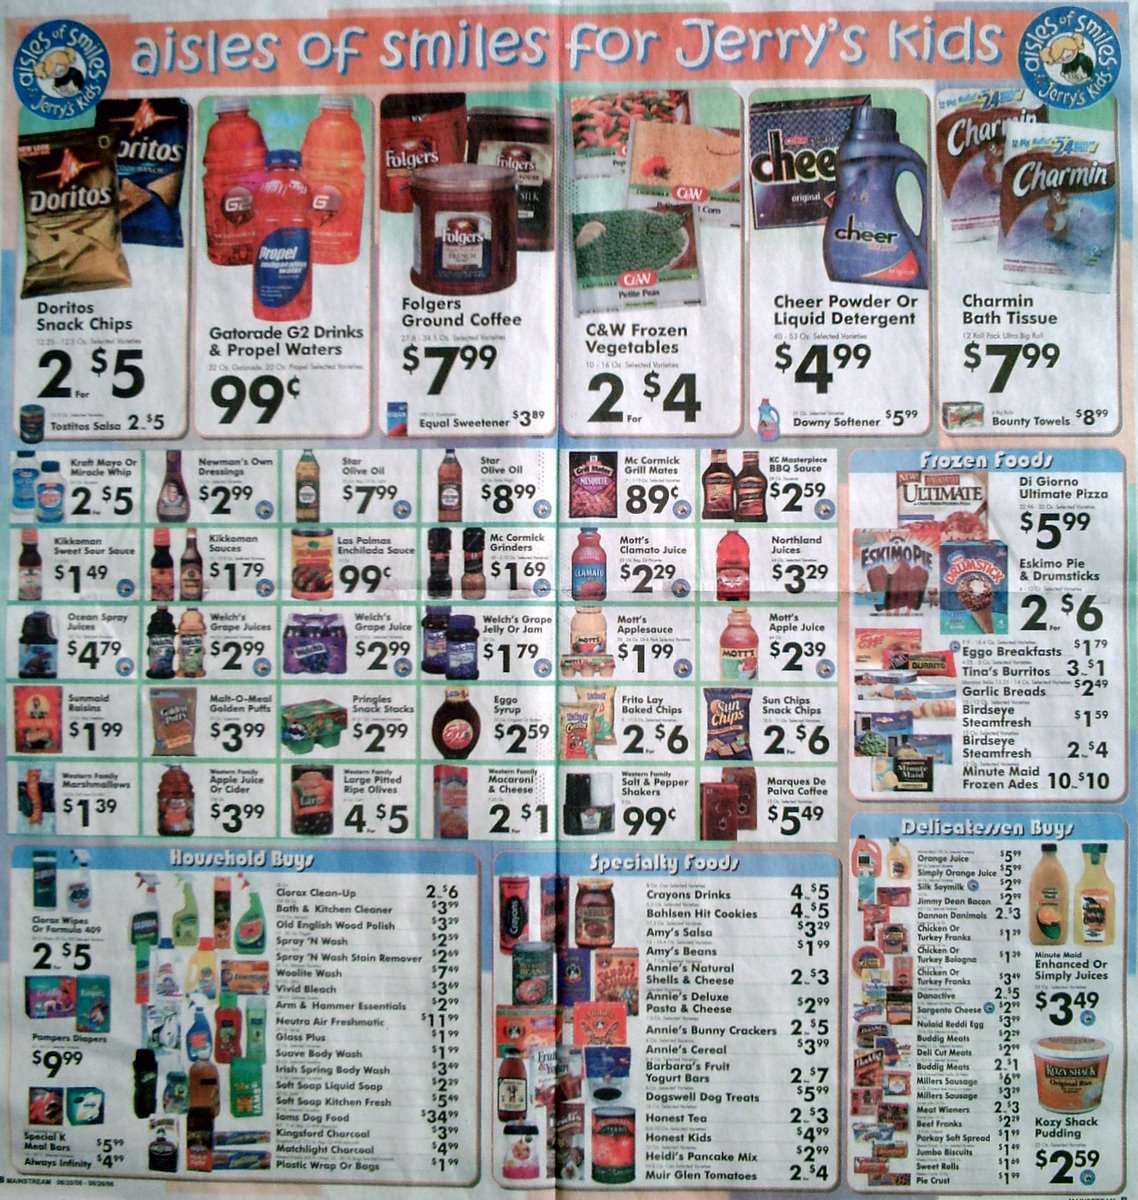 Big Trees Market Weekly Ad for August 20-26, 2008